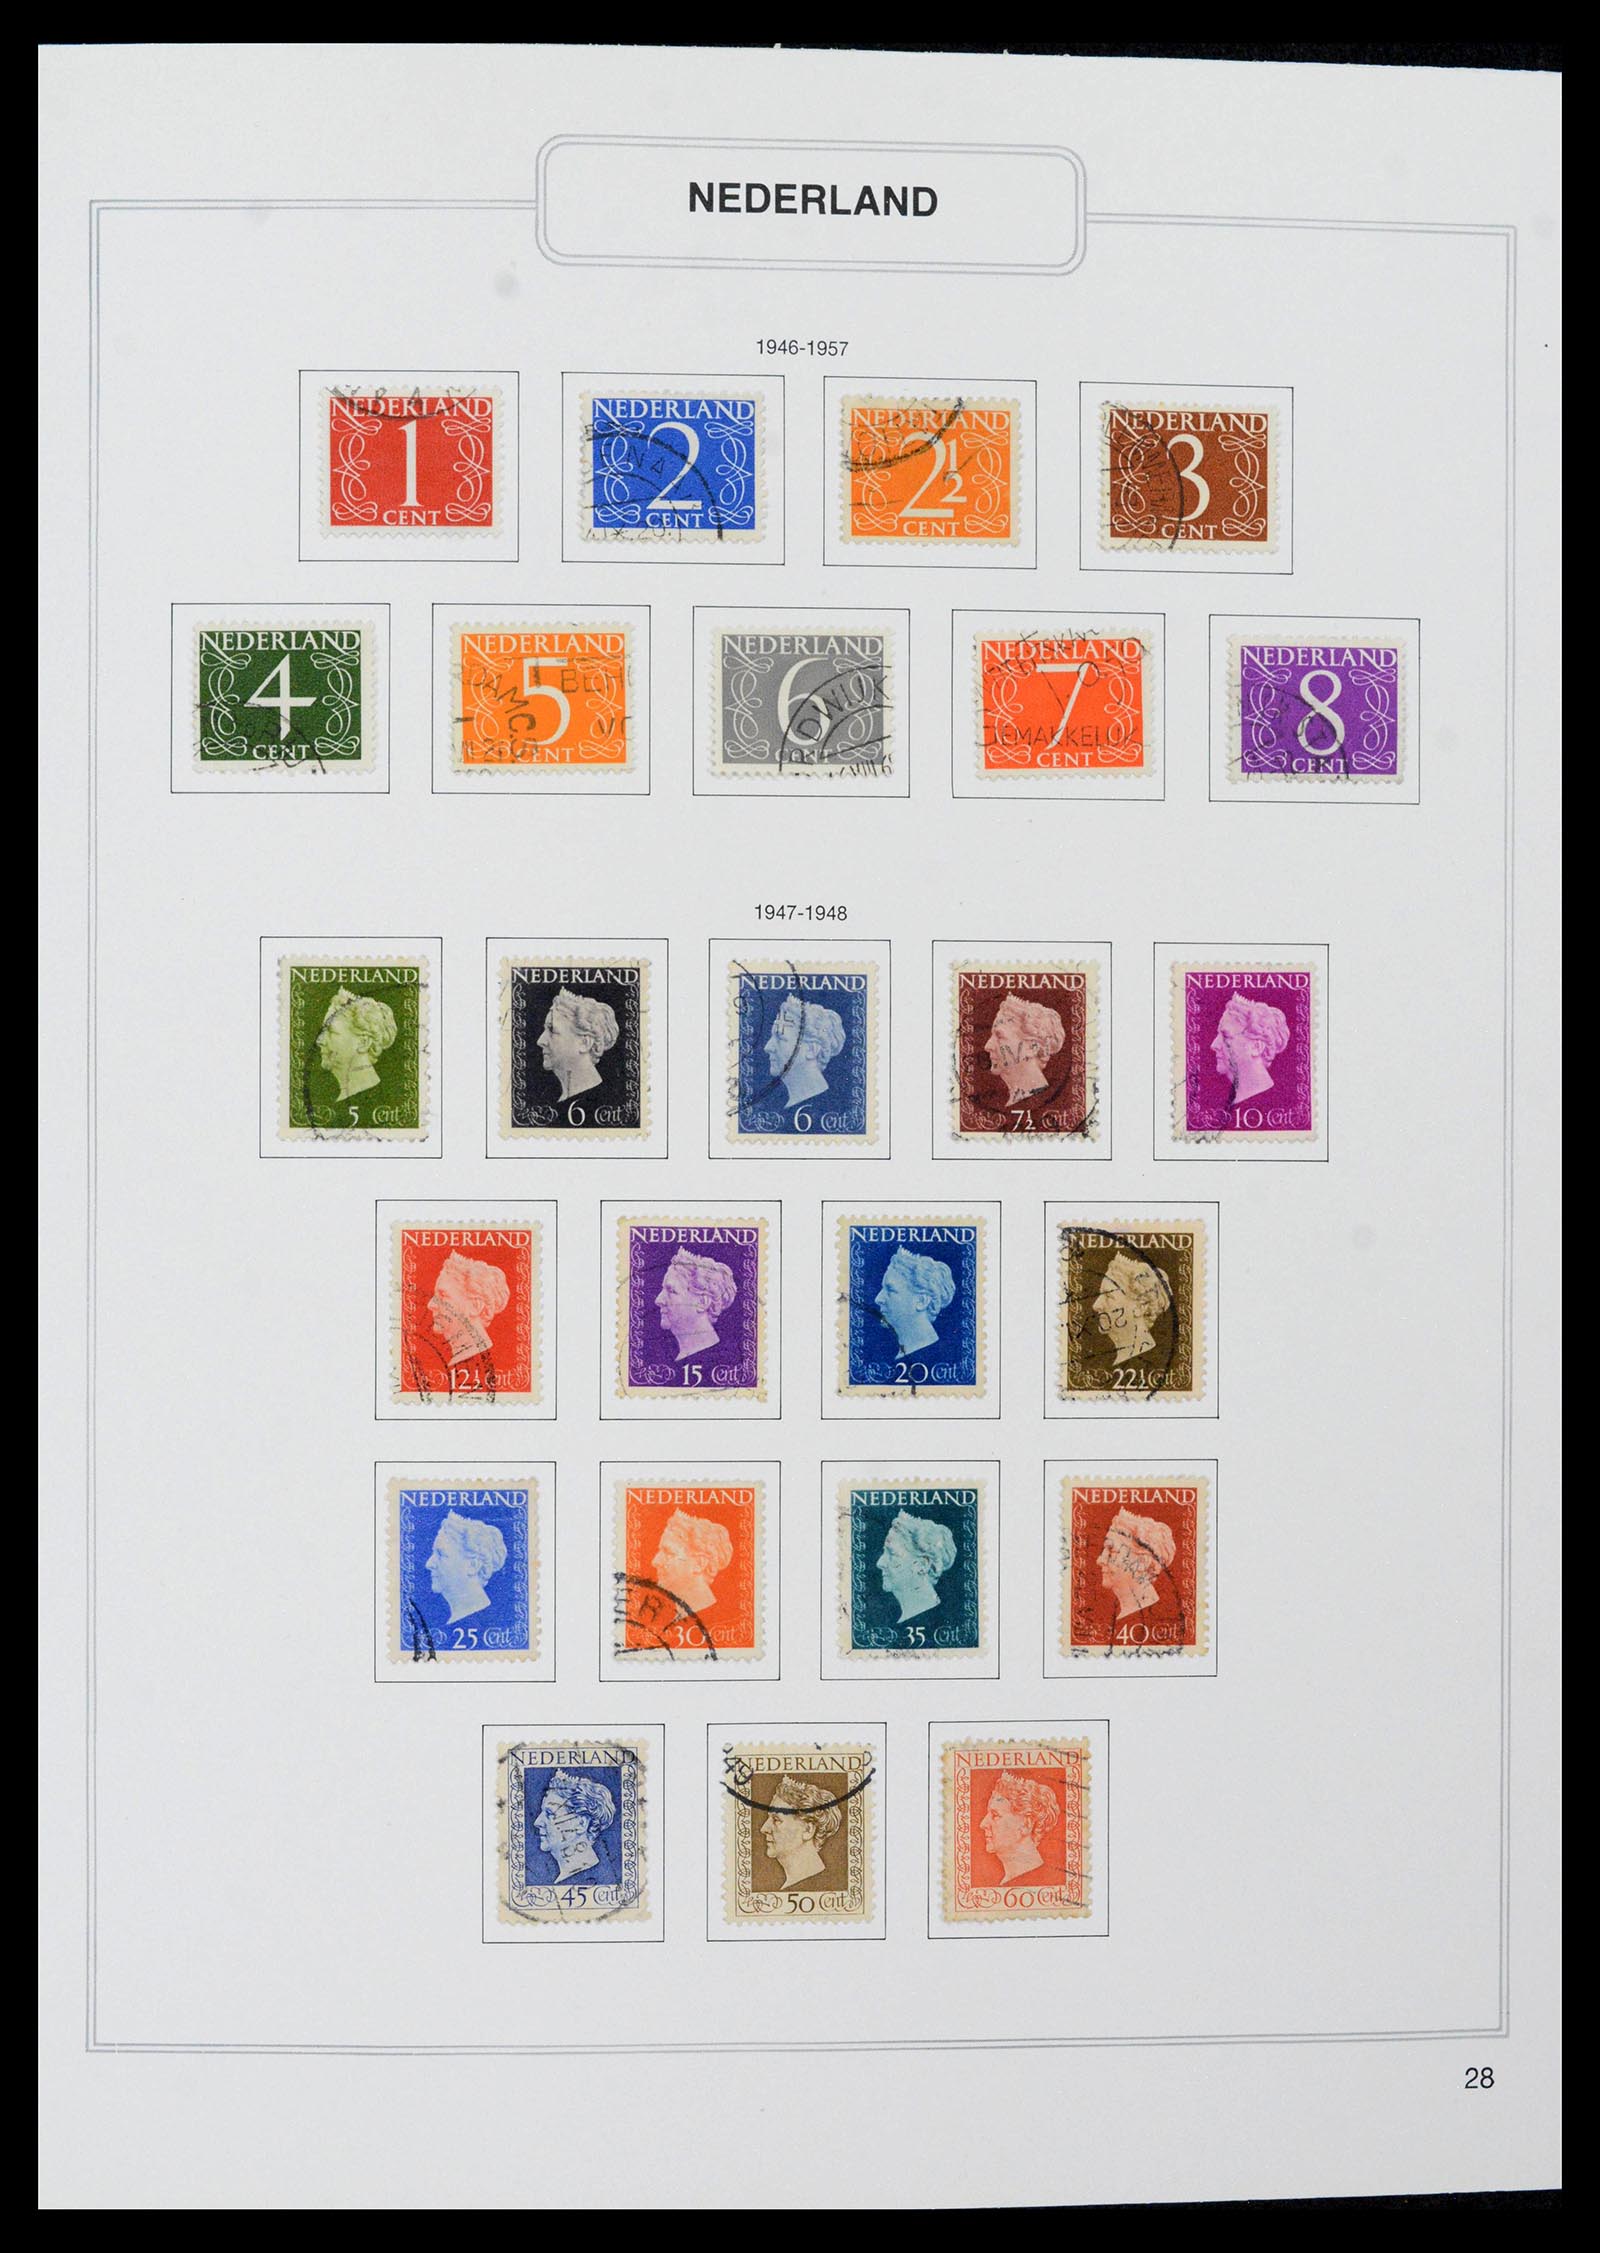 39261 0028 - Stamp collection 39261 Netherlands 1852-2015.